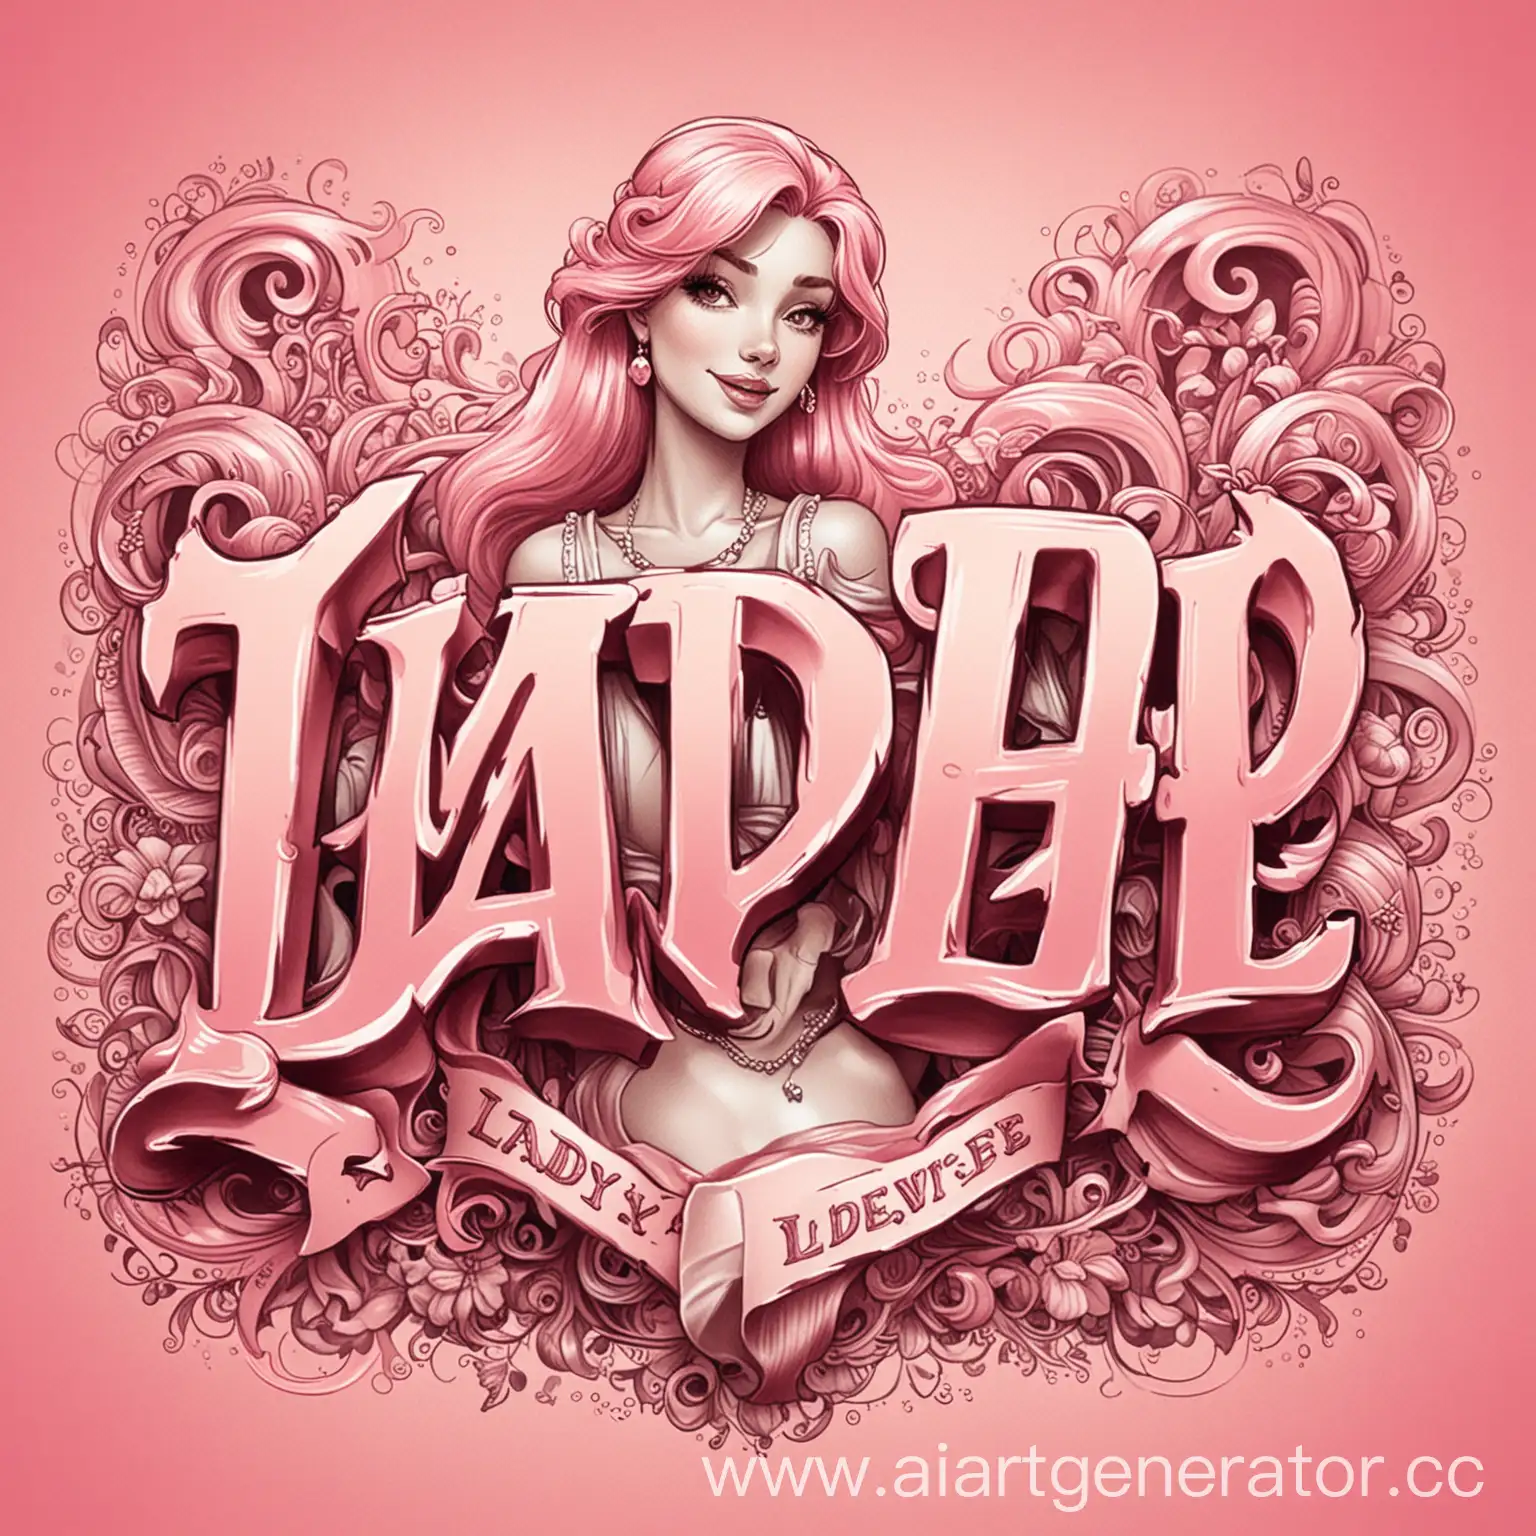 Playful-Cartoon-Font-Lady-TEE-in-Vibrant-Pink-Tones